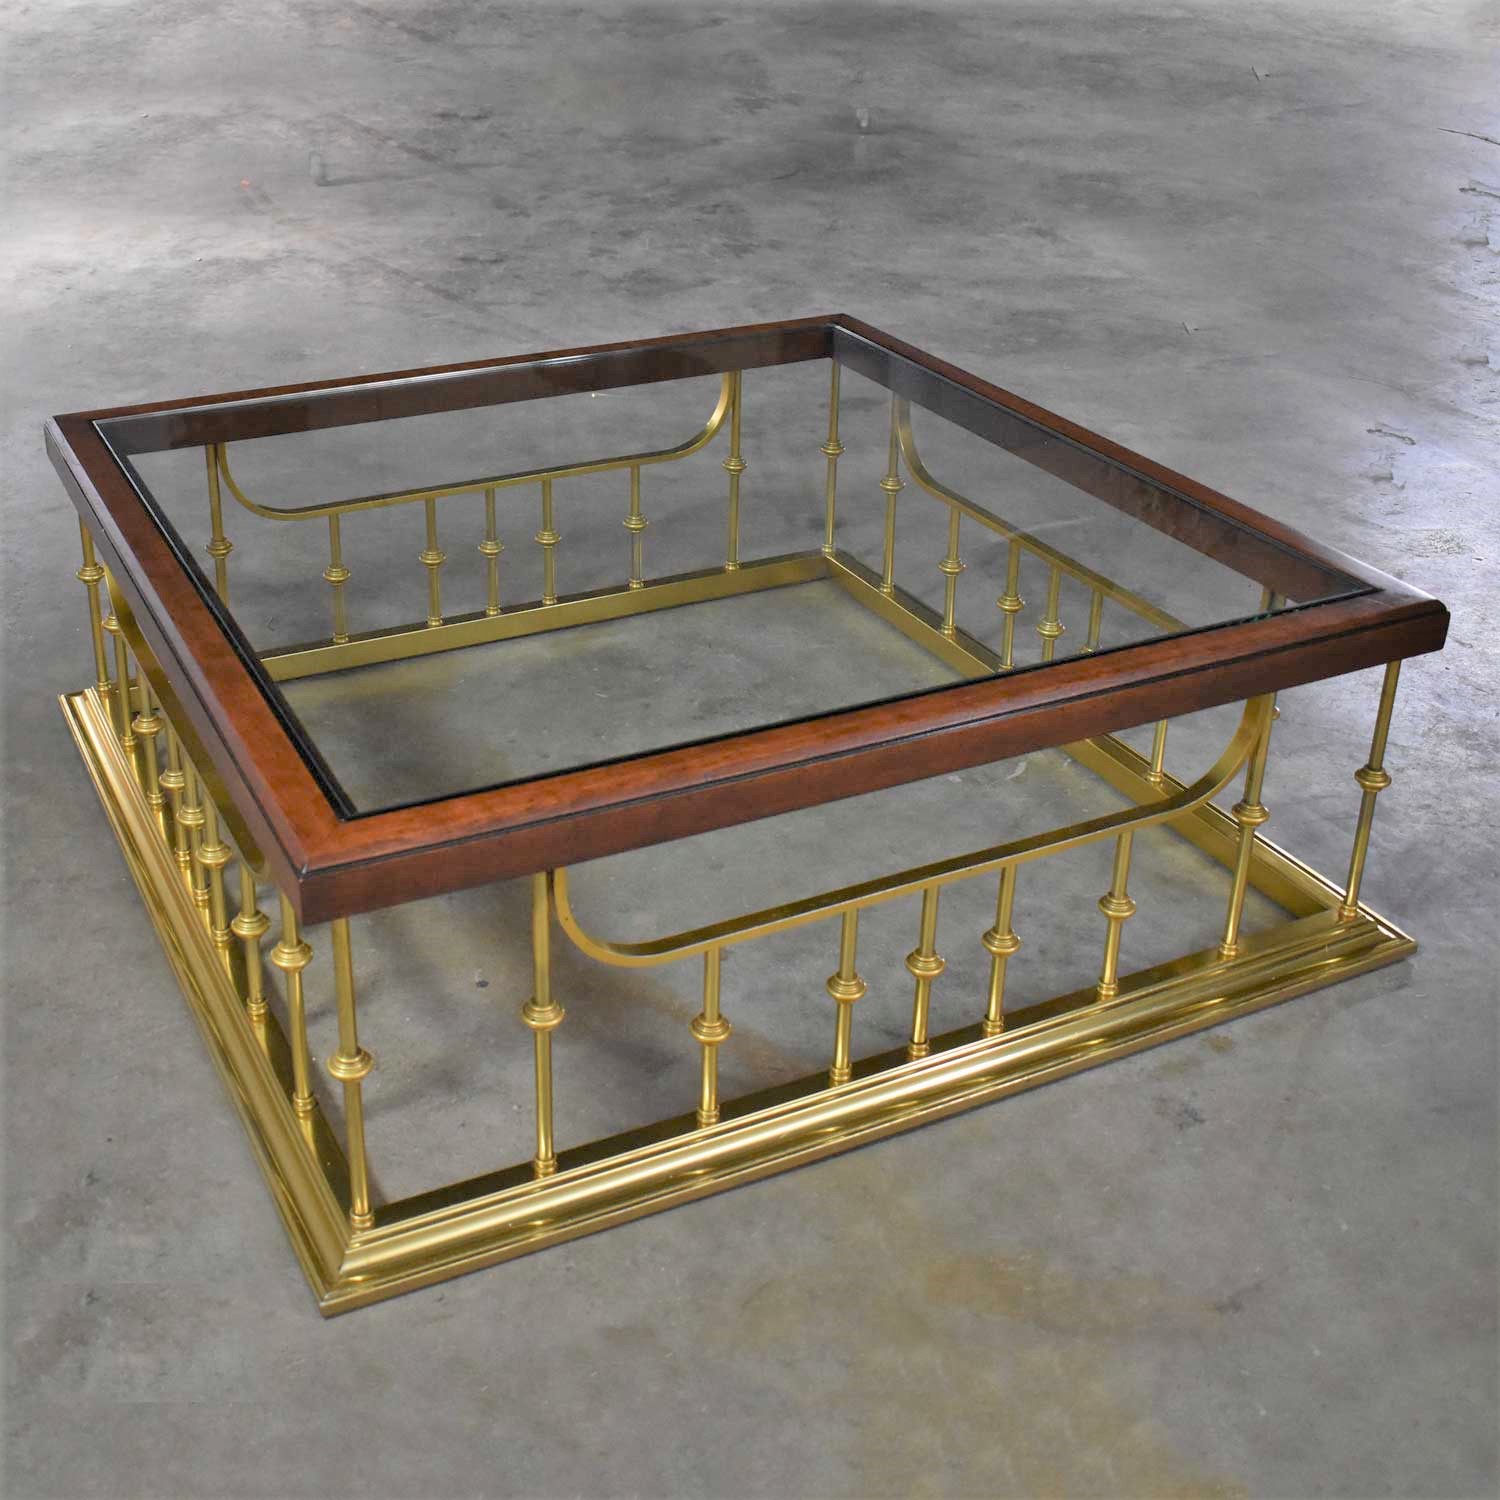 Brass Plated Glass Wood Fireplace Fender Style Large Square Coffee Table Erwin Lambeth Attr.